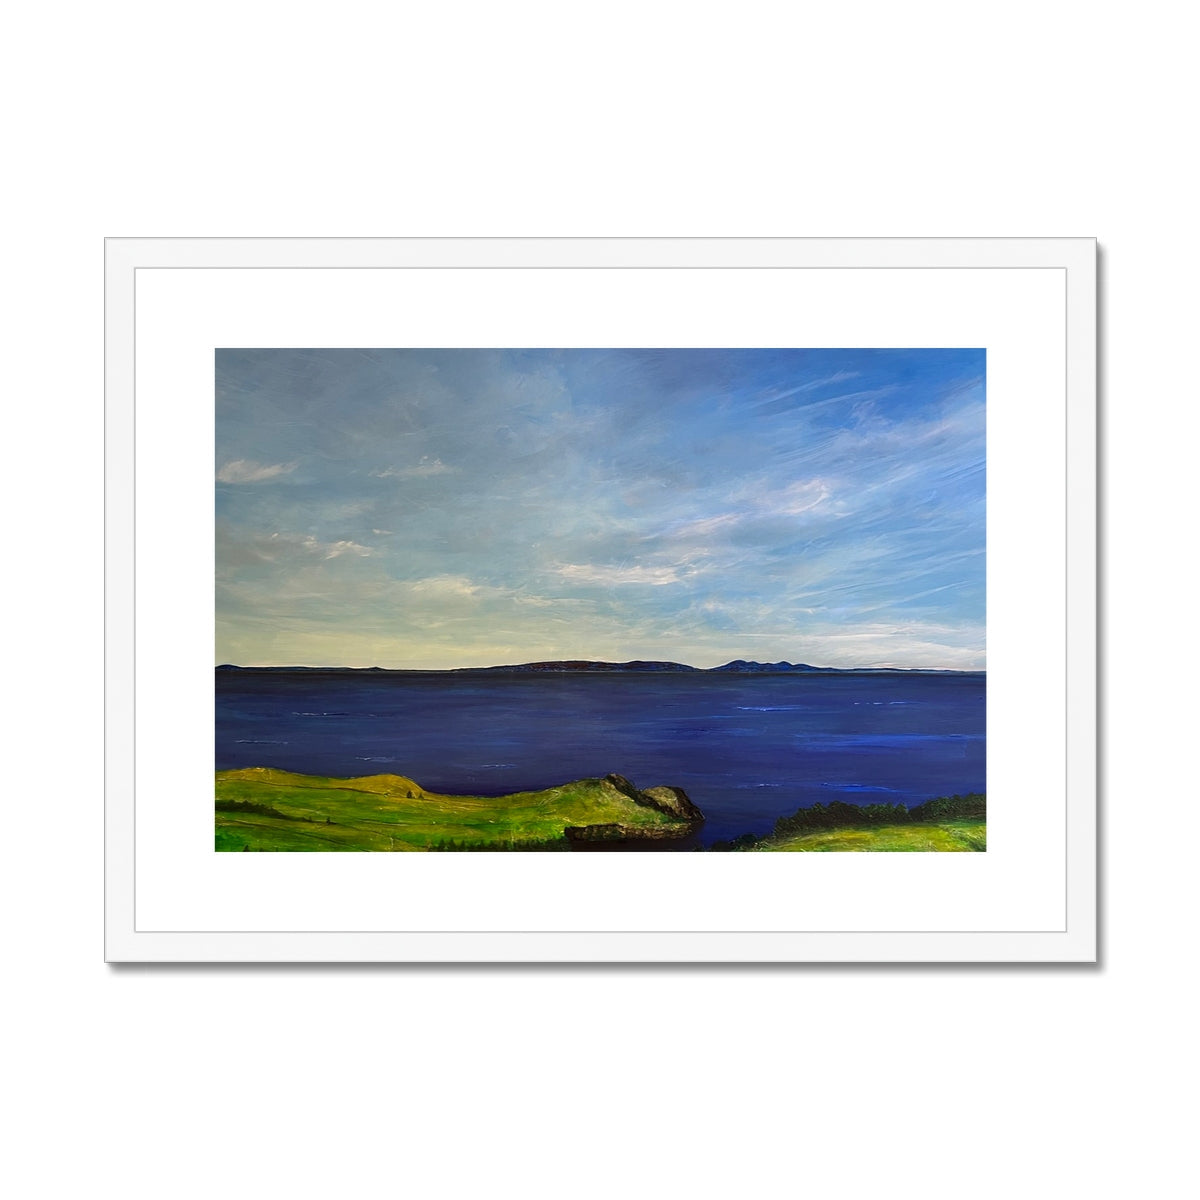 From Ireland To Scotland Painting | Framed & Mounted Prints From Scotland-Framed & Mounted Prints-World Art Gallery-A2 Landscape-White Frame-Paintings, Prints, Homeware, Art Gifts From Scotland By Scottish Artist Kevin Hunter